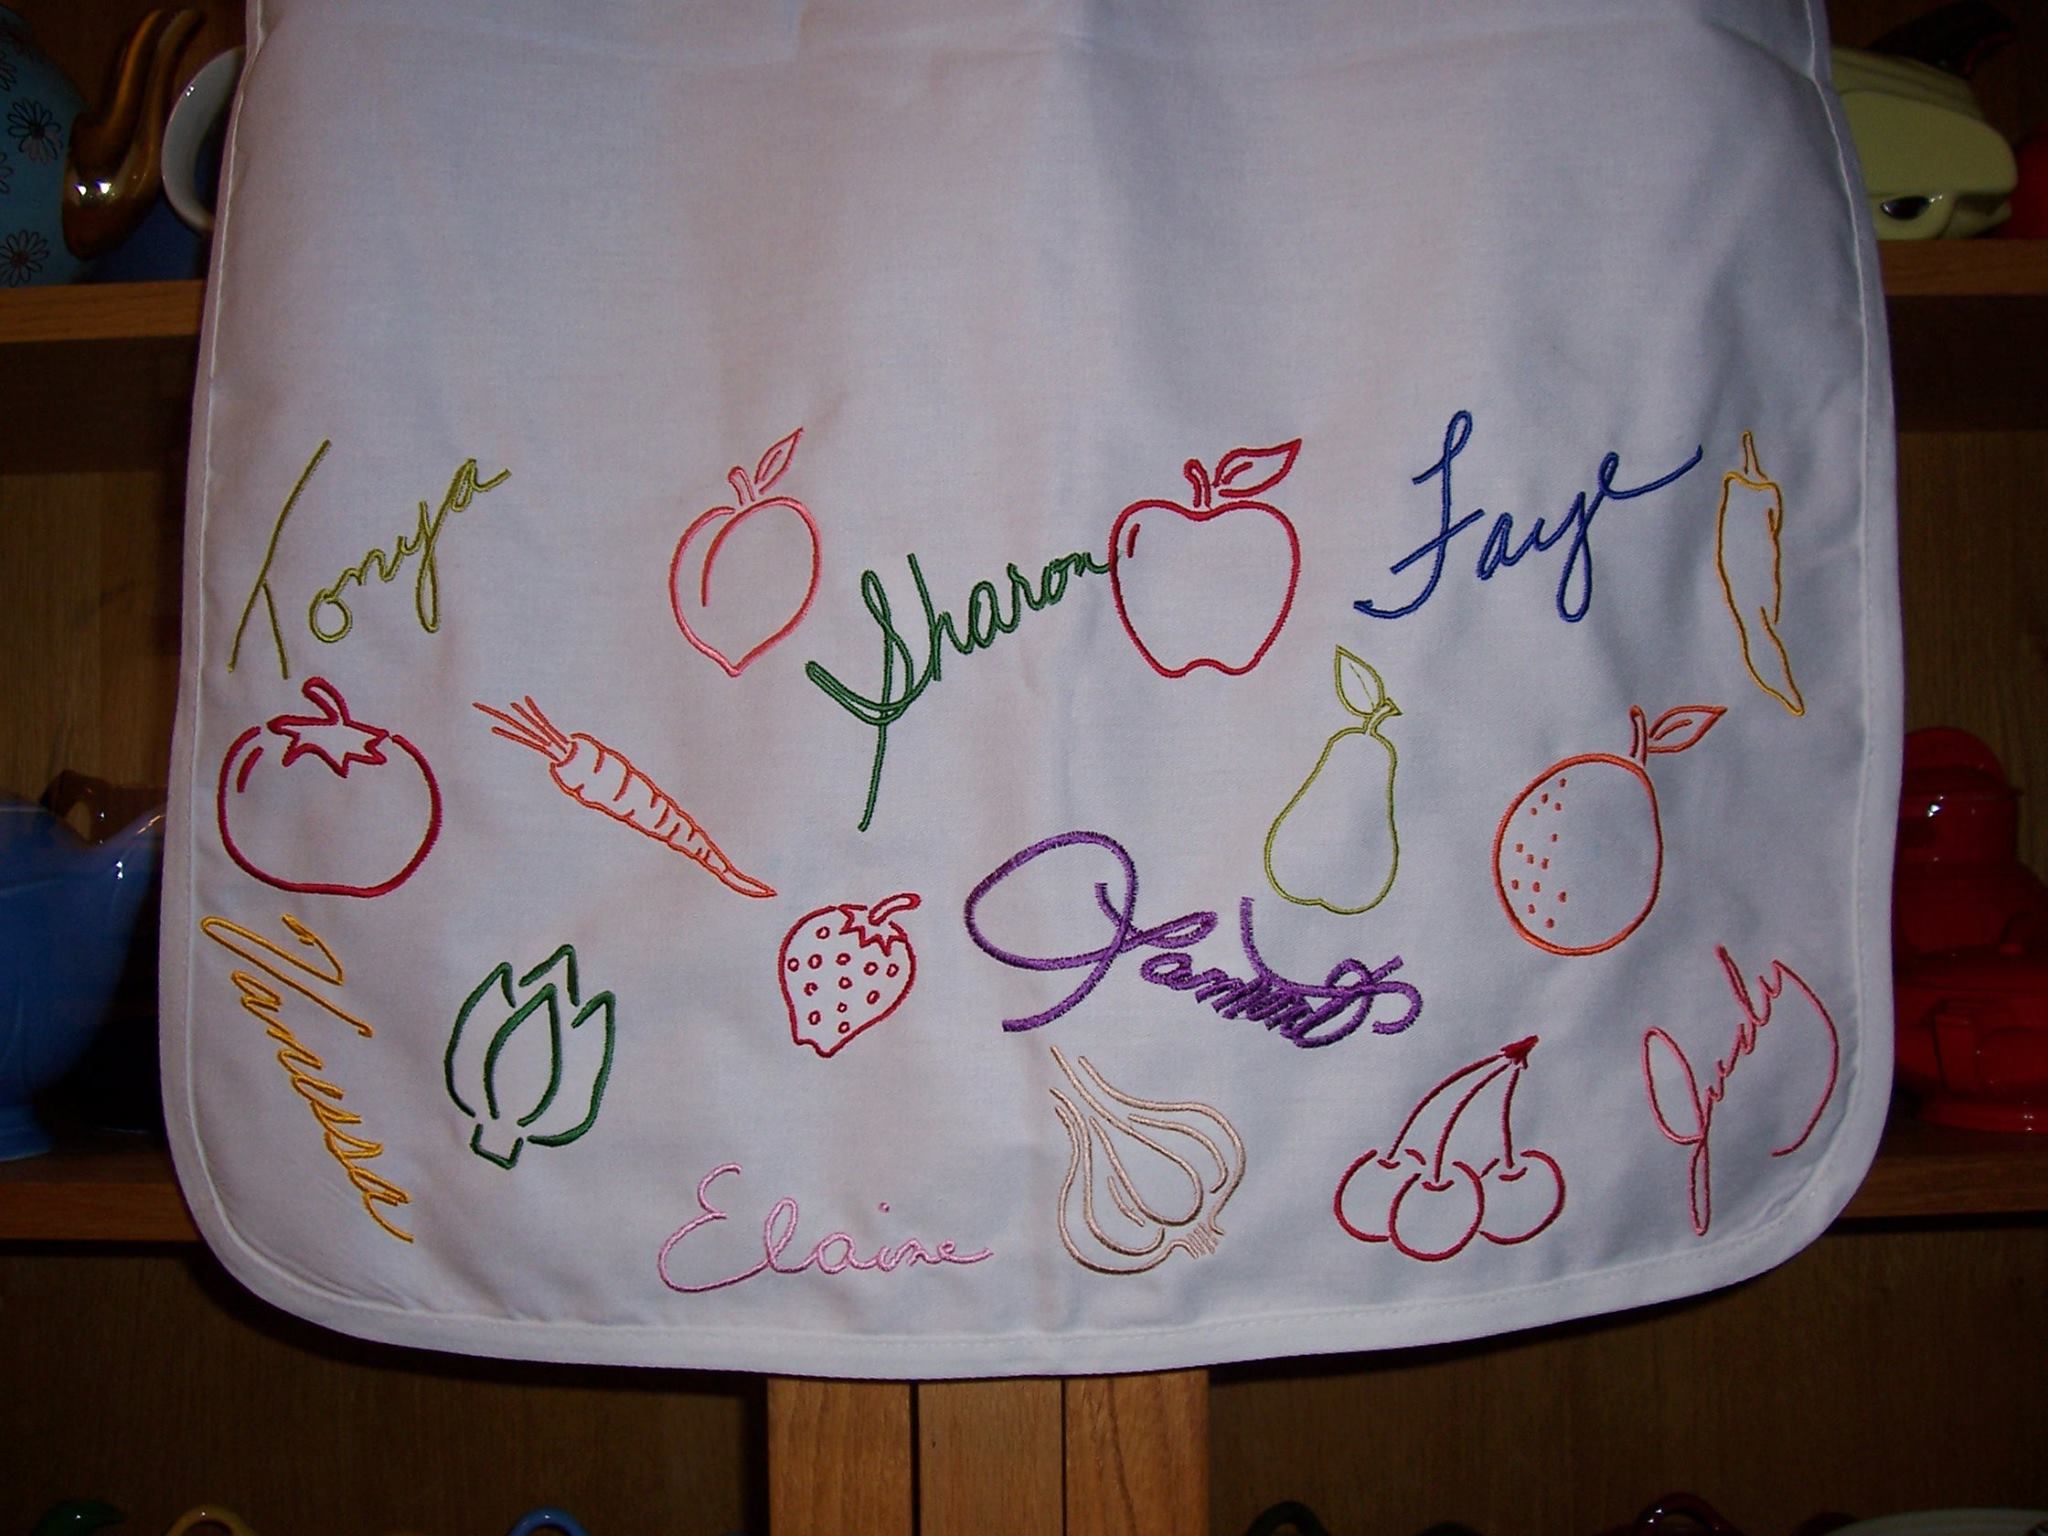 Apron with coworkers' signatures for retirement gift - Closer view of signatures